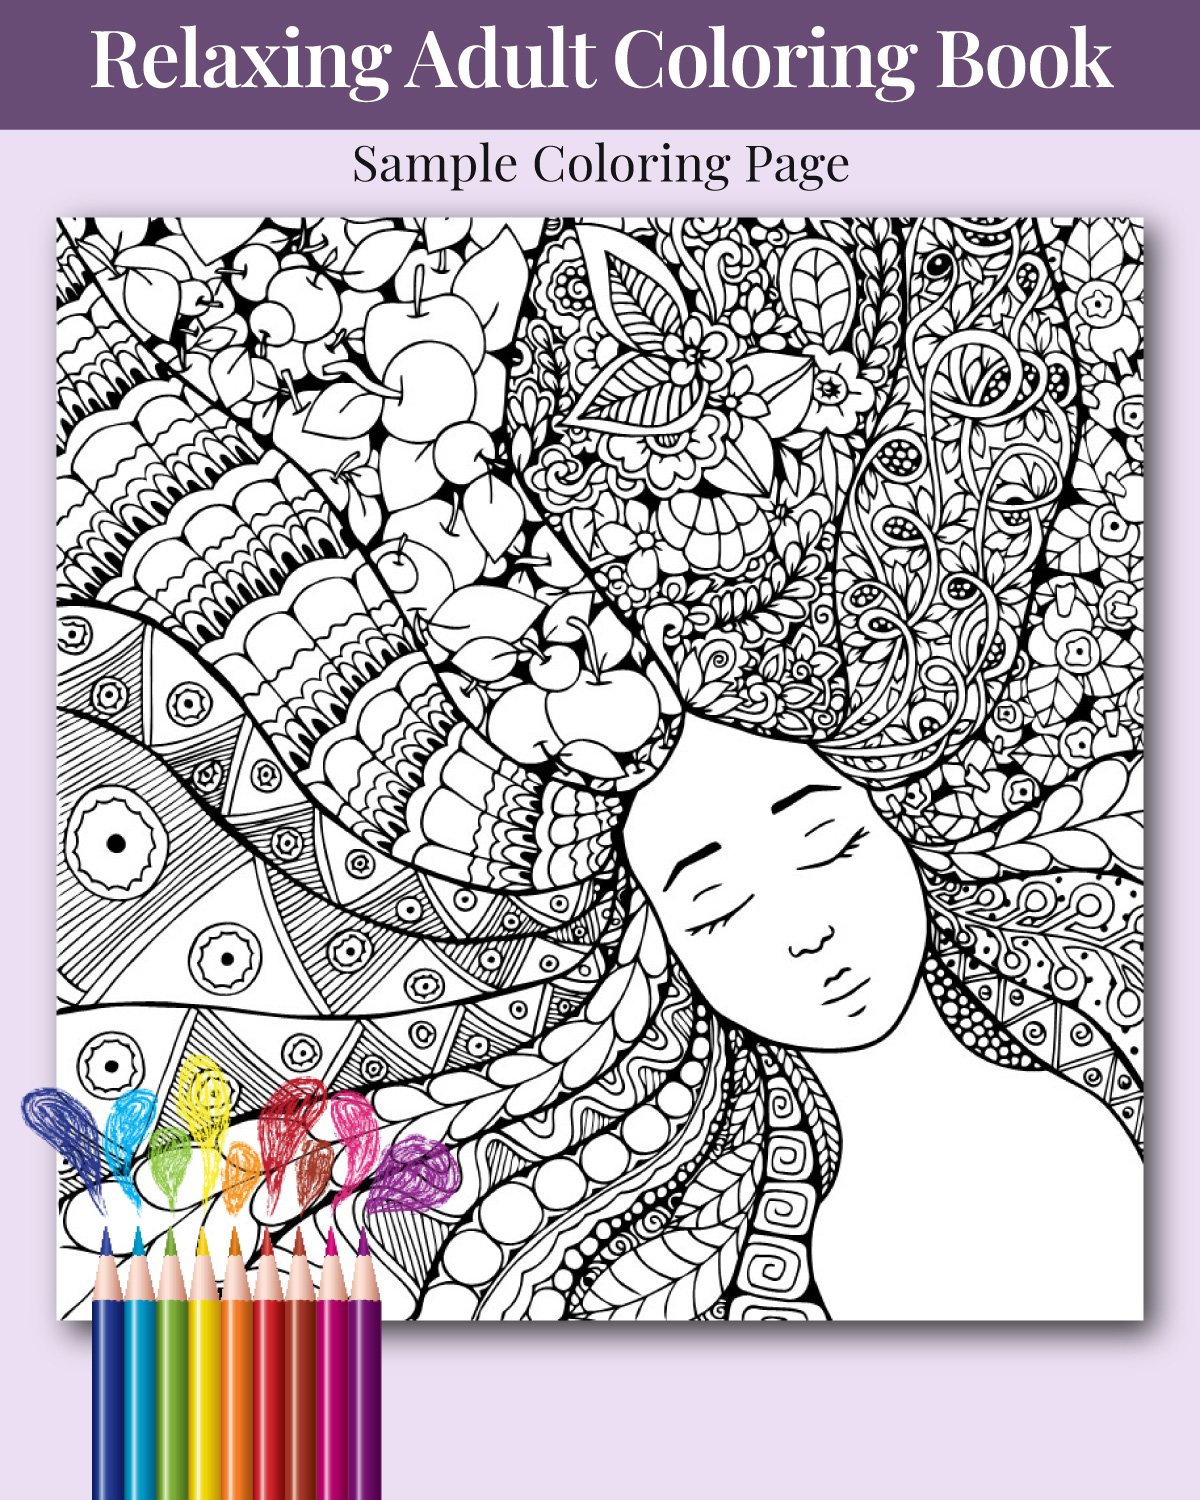 She-Believed-She-Could-So-She-Did-Adult-Coloring-Book-Sample-03